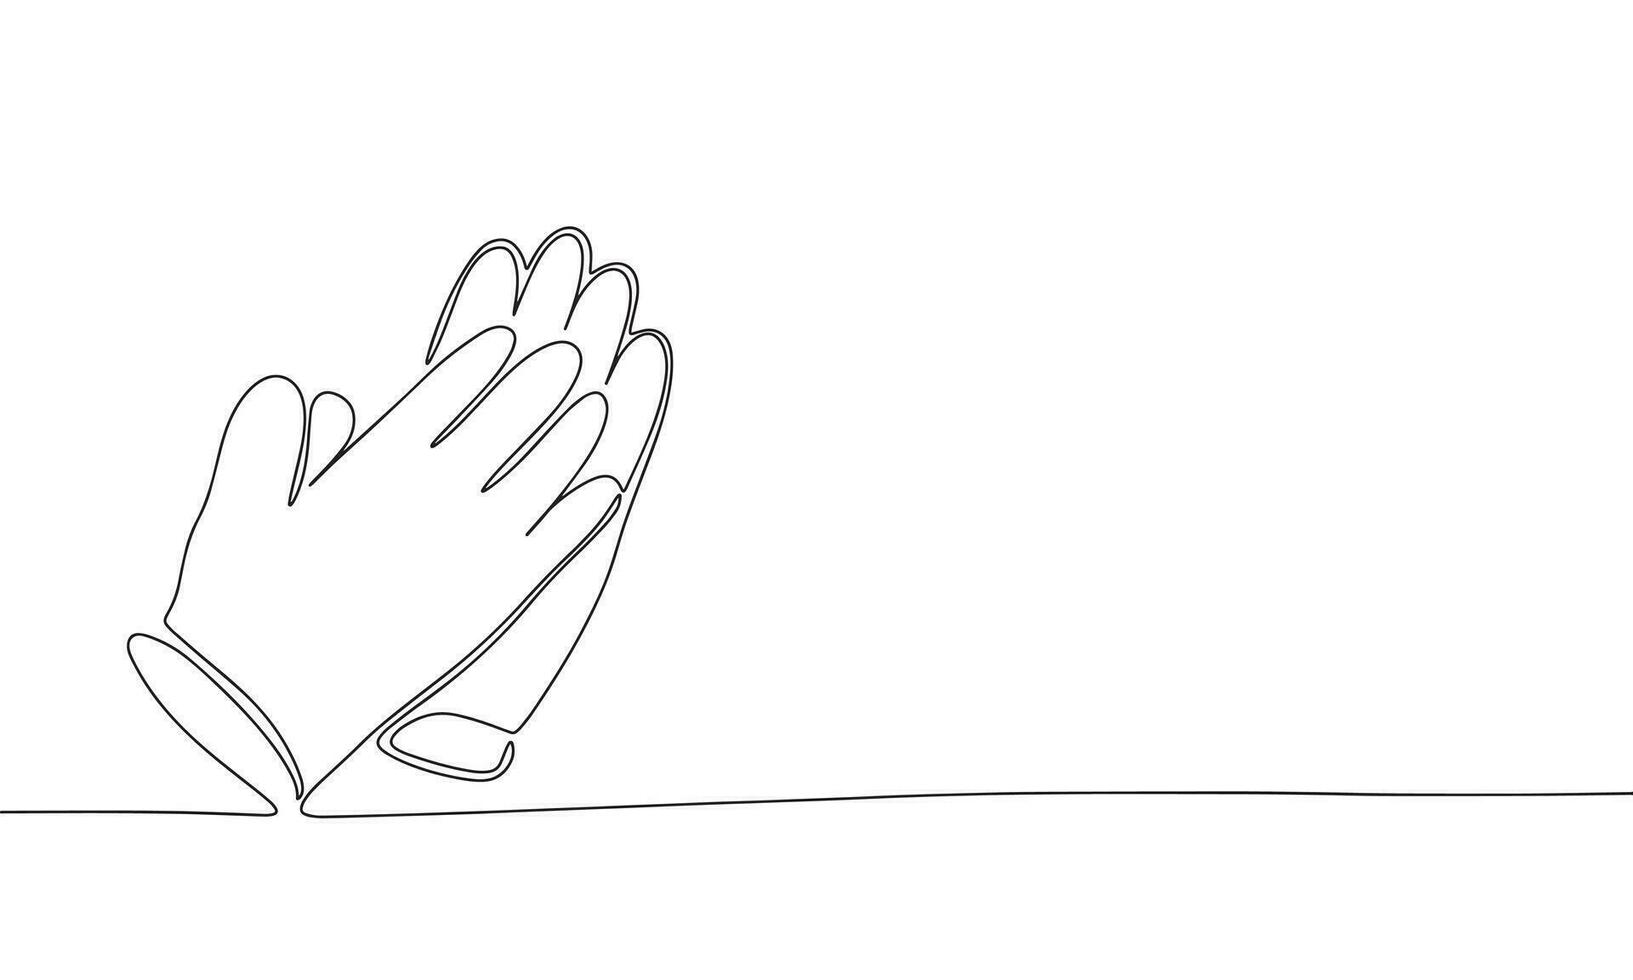 One line continuous gloves. Line art clothes banner concept. Hand drawn, outline vector illustration.